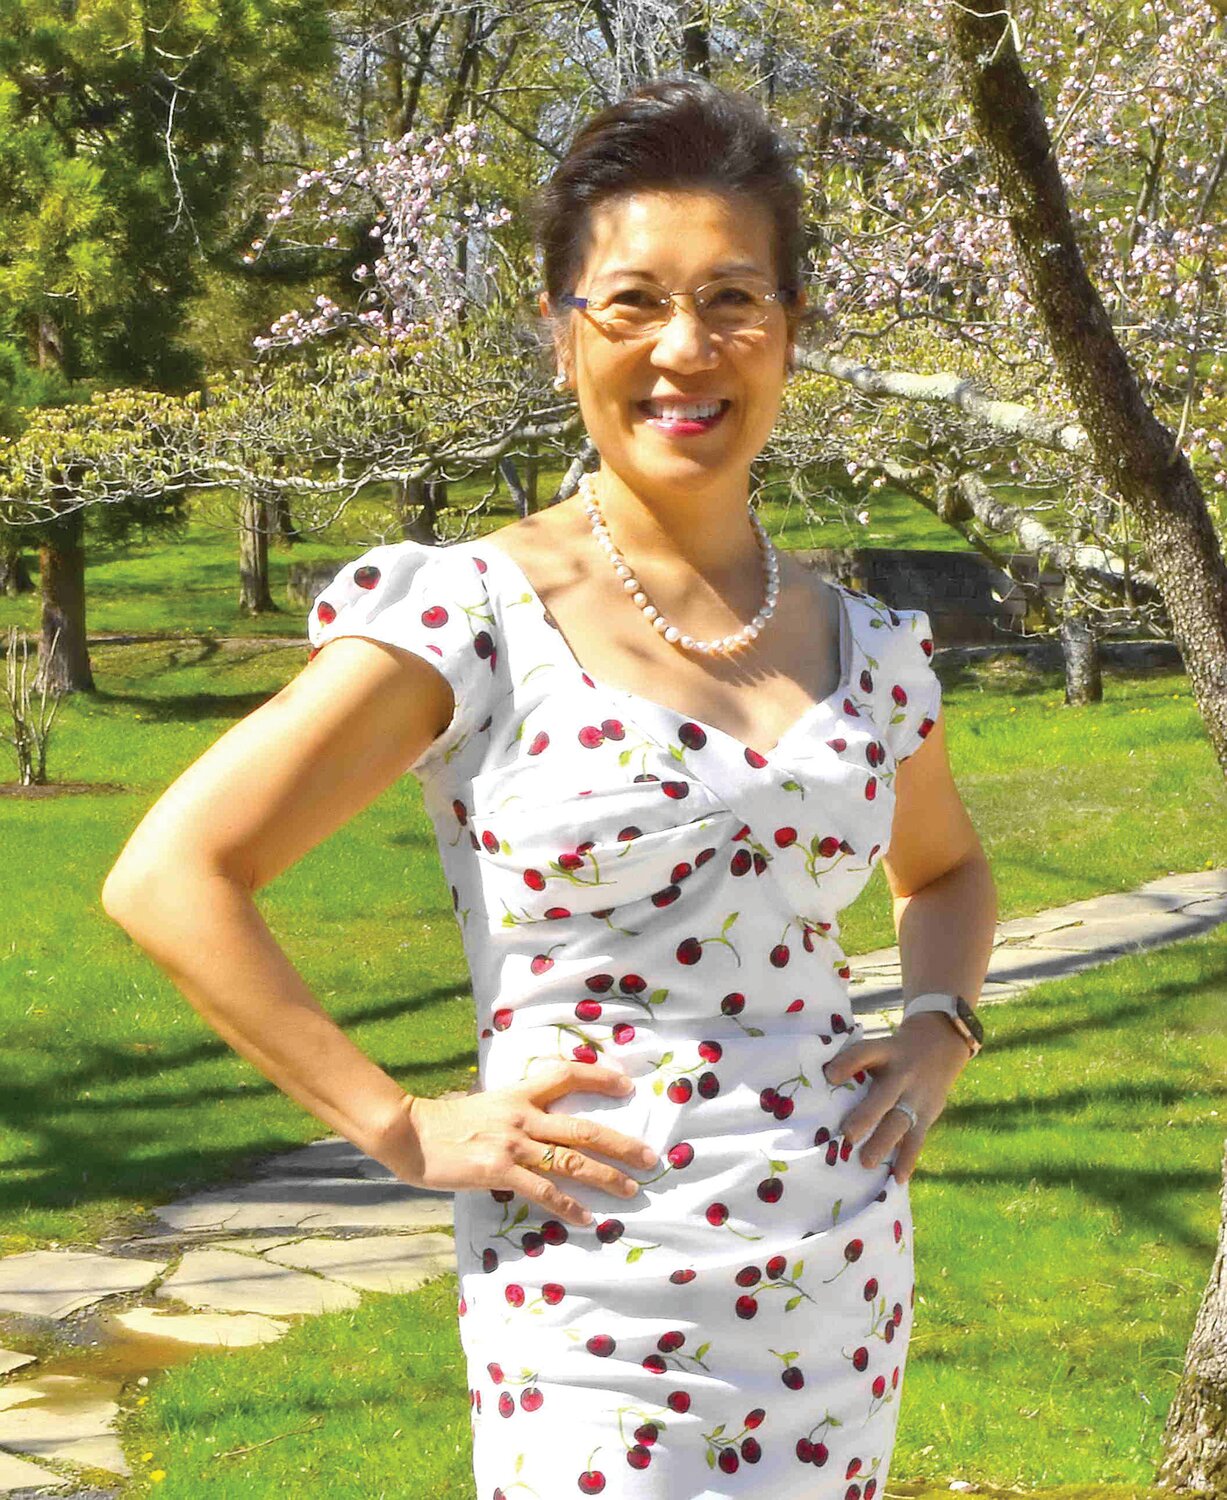 Guest Judy Chang Cody wears attire that keeps with the cherry blossom theme.